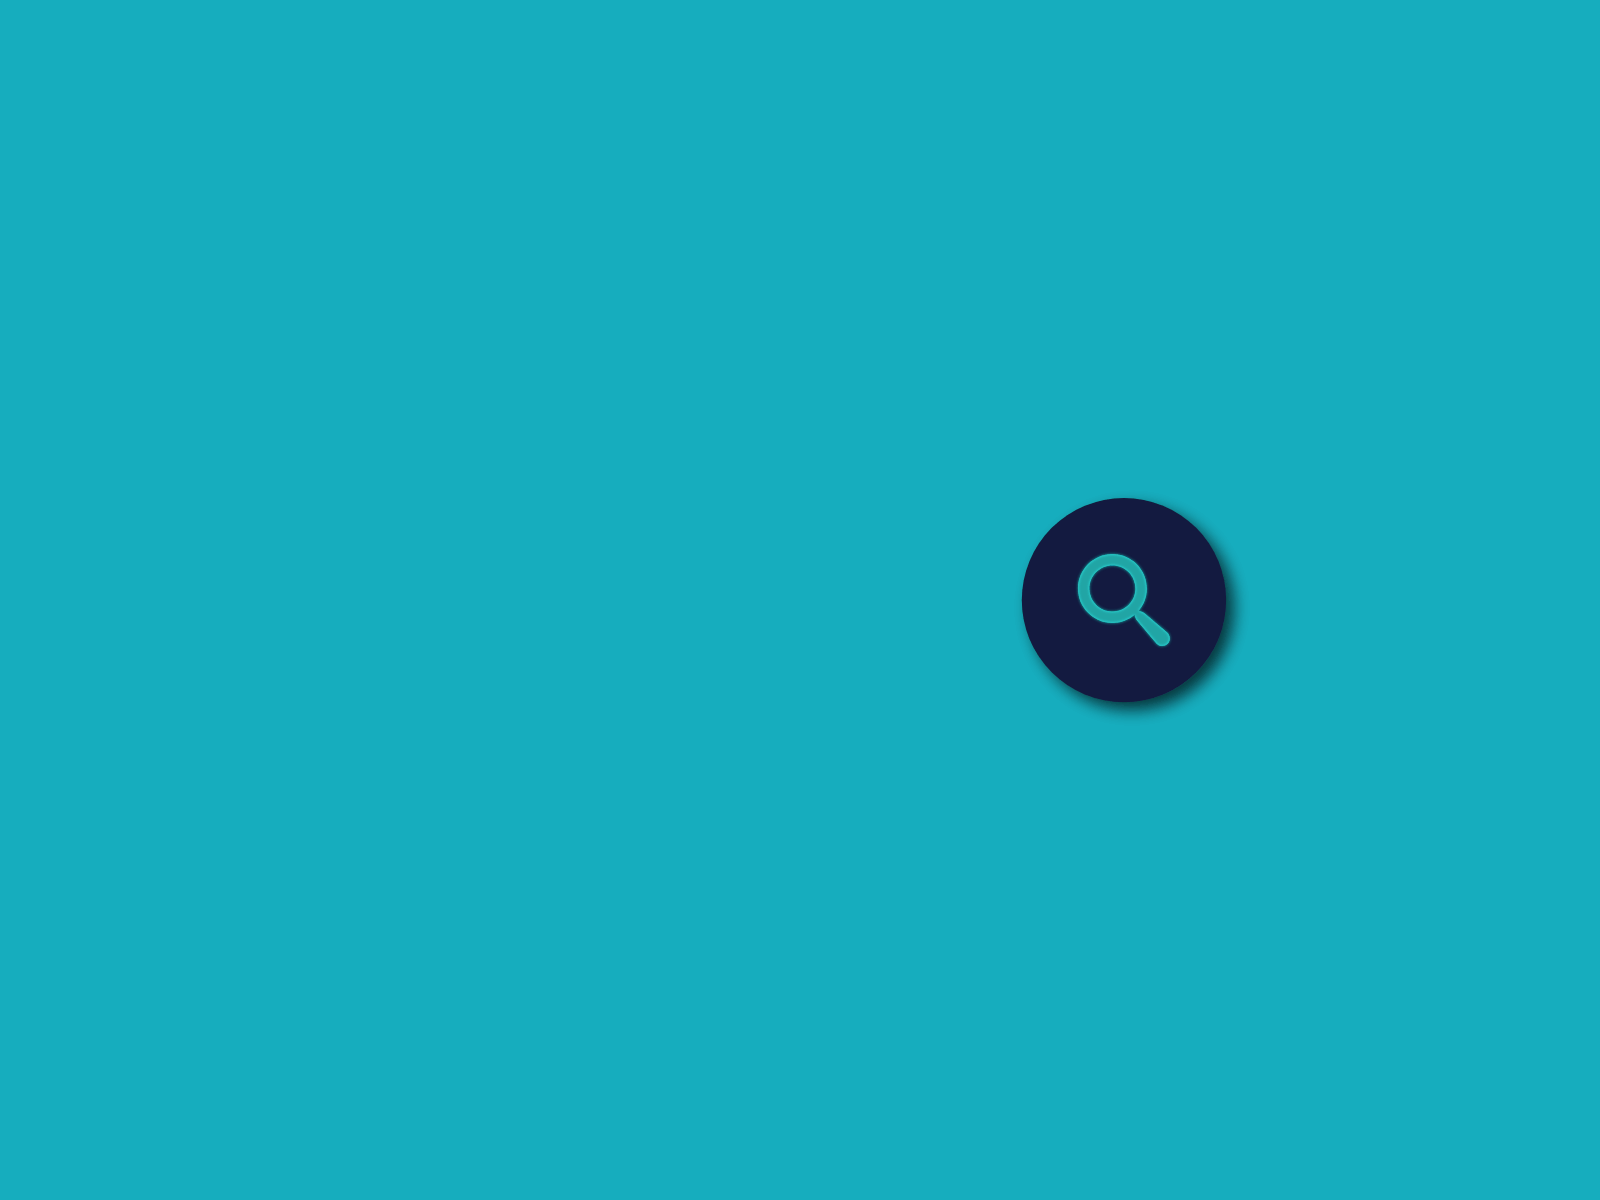 Search Bar Microinteraction 100 days of ui 100daychallenge app design dailyui design microinteraction